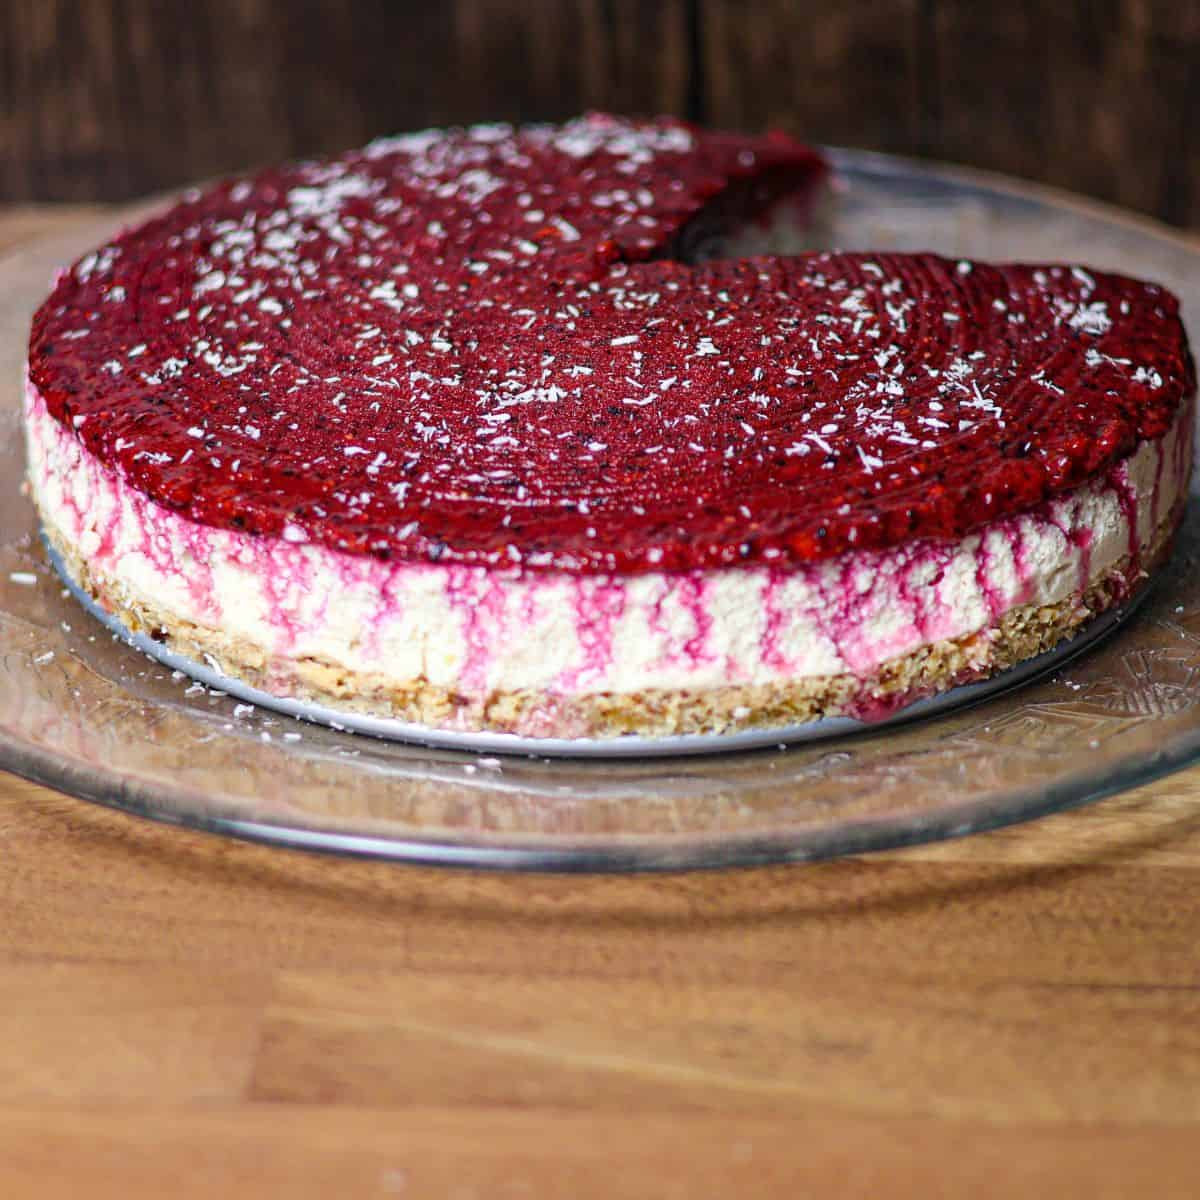 A fully garnished no-bake berry cheesecake with a rich red topping and sprinkled coconut on a glass serving dish.